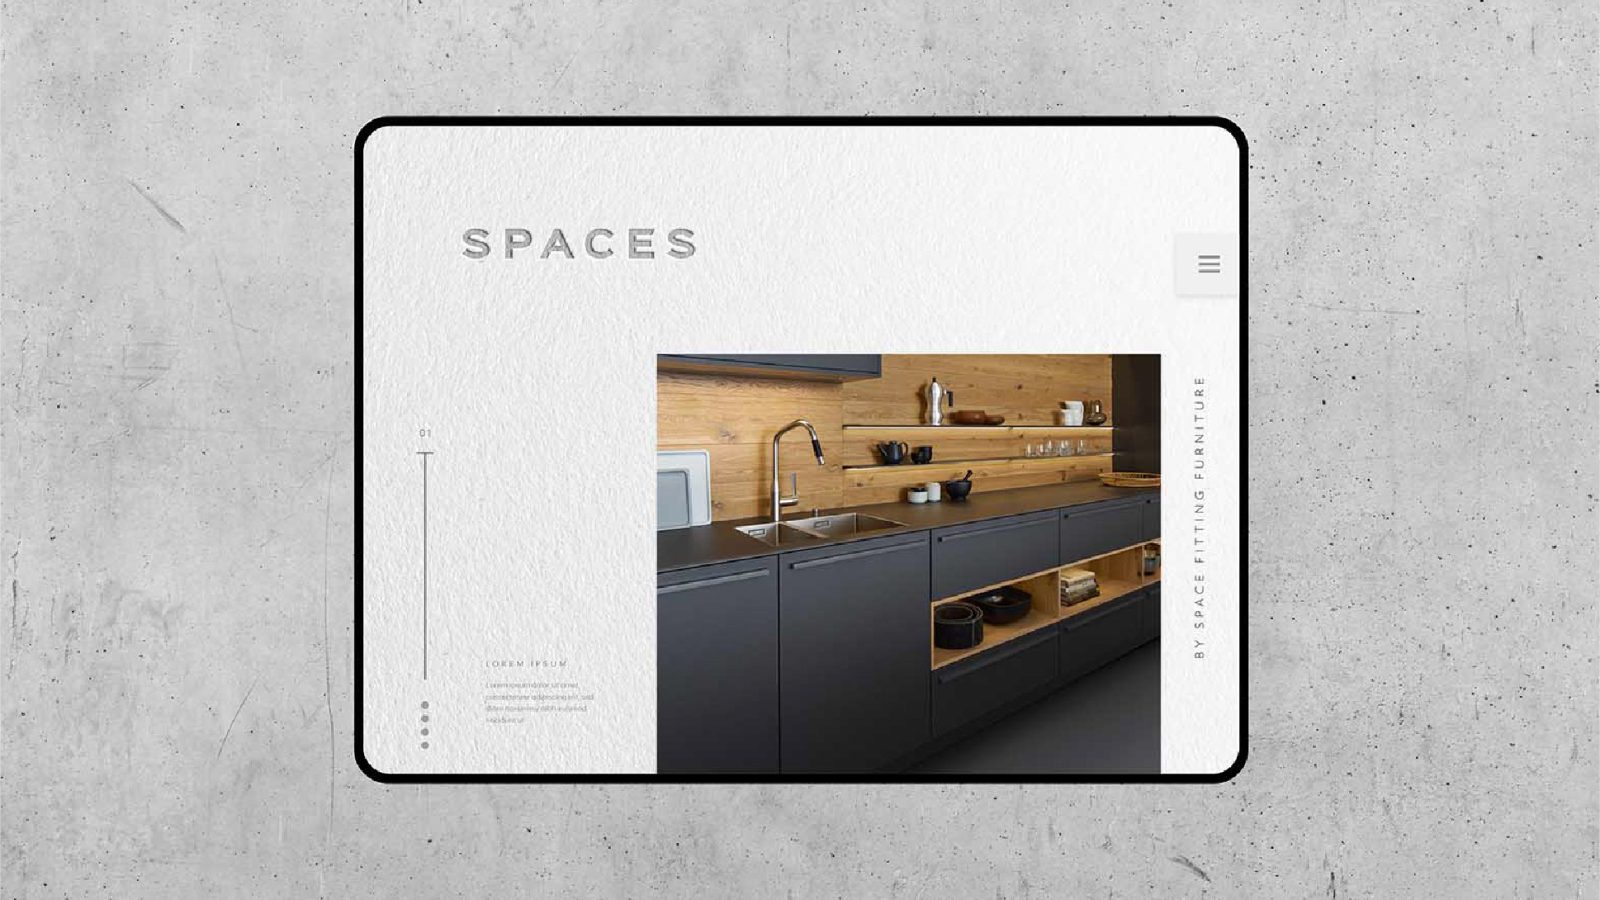 A digital magazine layout displayed on a tablet, designed by Design Agency Bristol, features a modern kitchen with wooden accents and grey cabinets, titled 